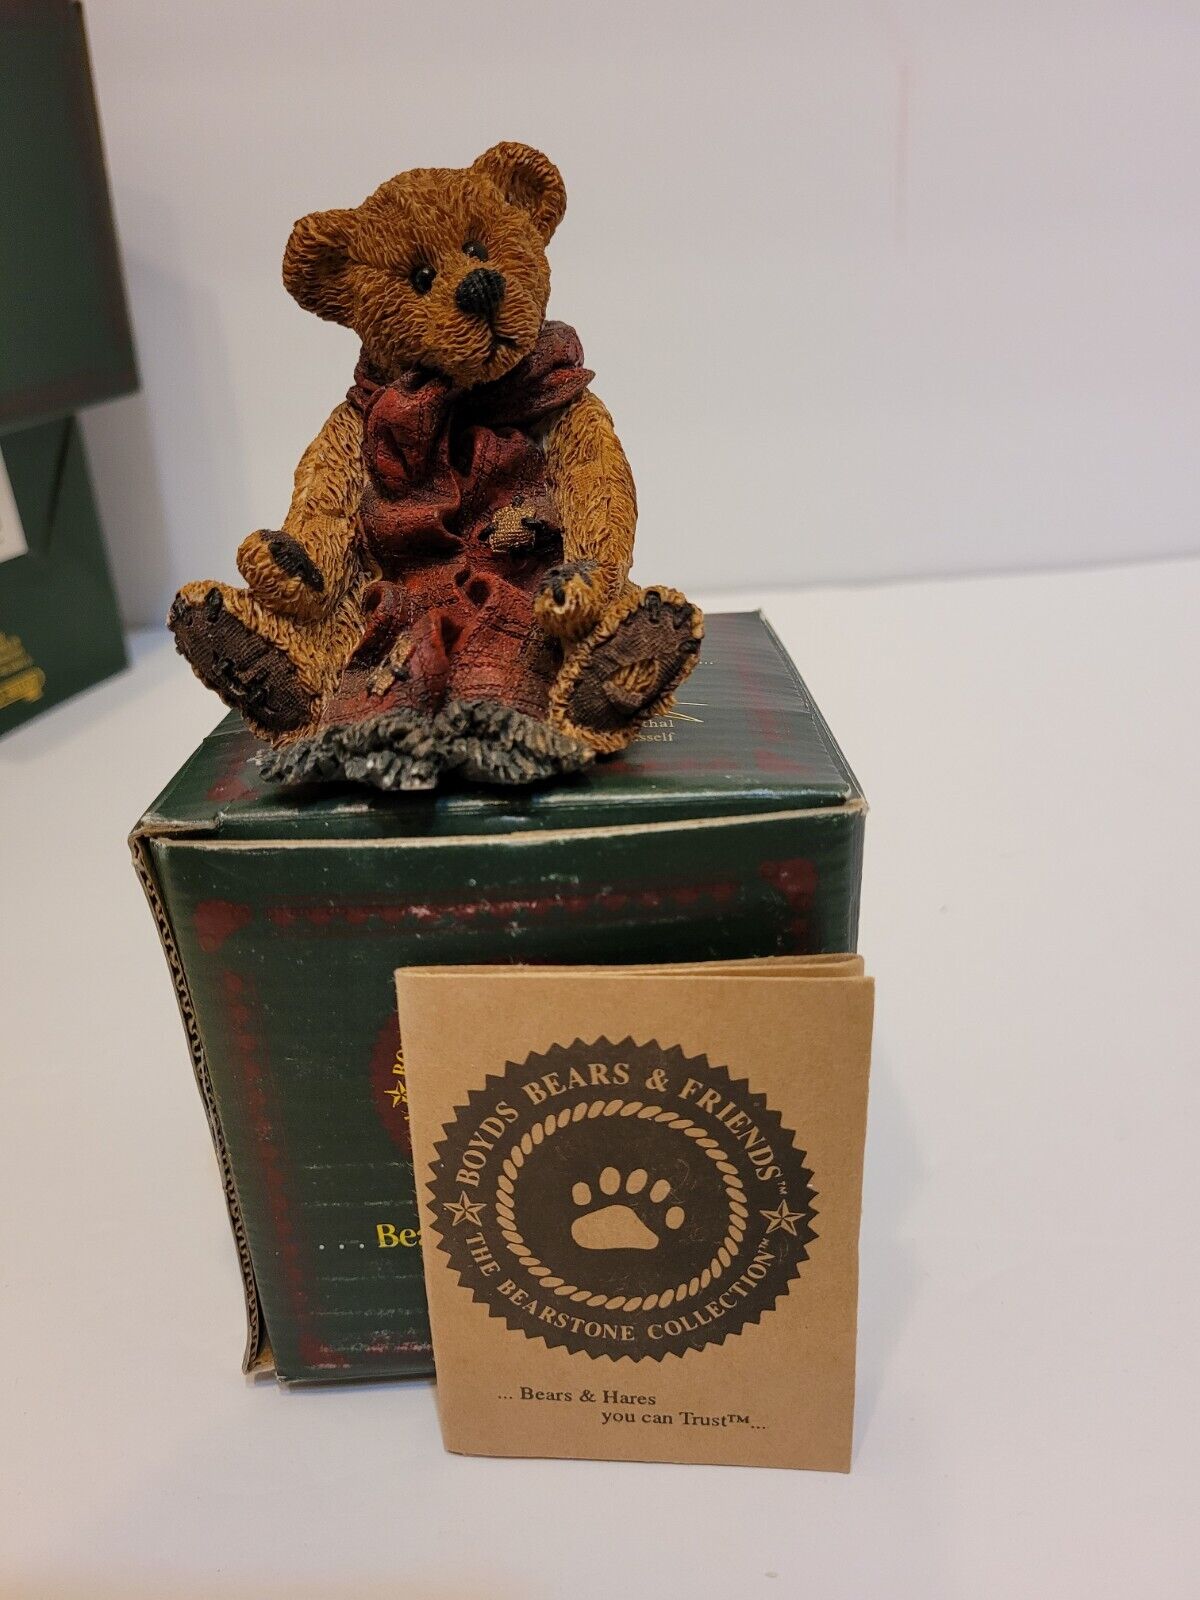 Boyds Bears Figurines, Grenville..with red scarf 6E/2692